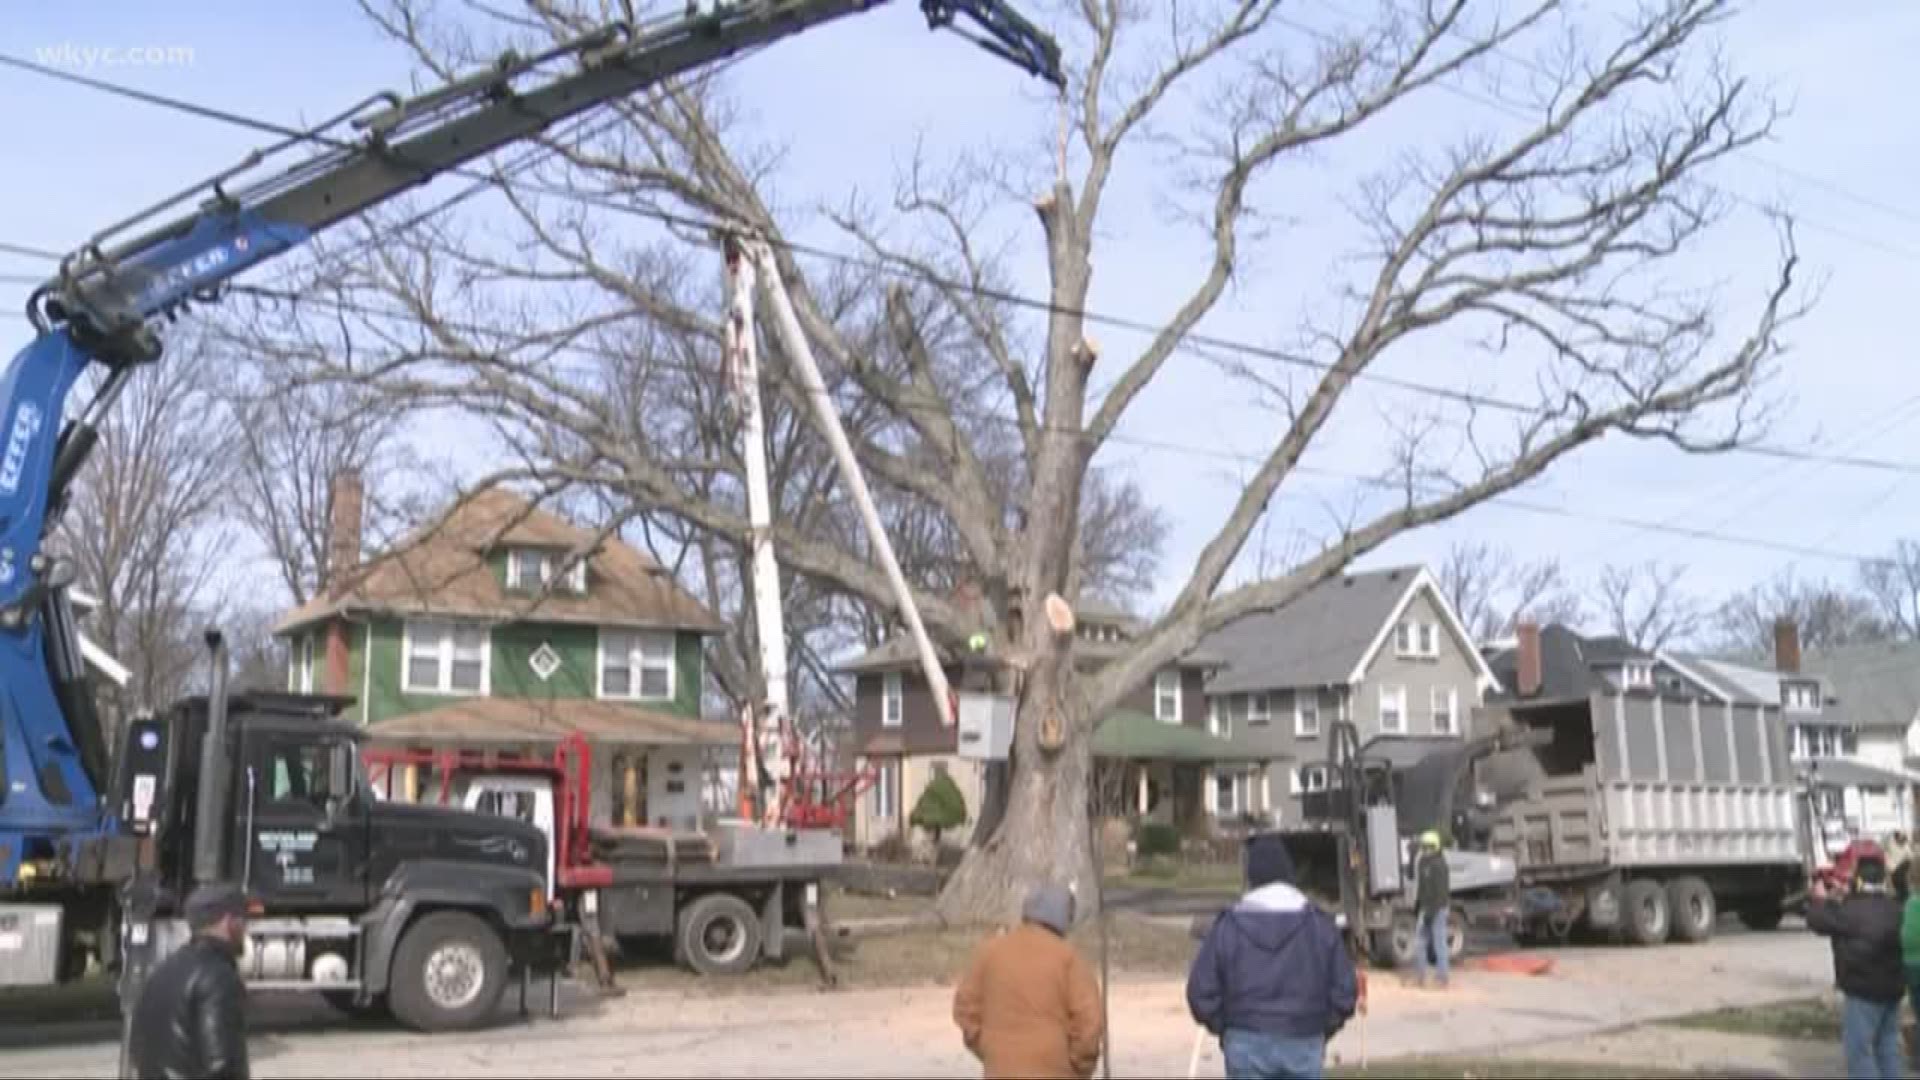 March 22, 2018: After standing for more than 250 years, one of Ohio's oldest trees was cut down today.